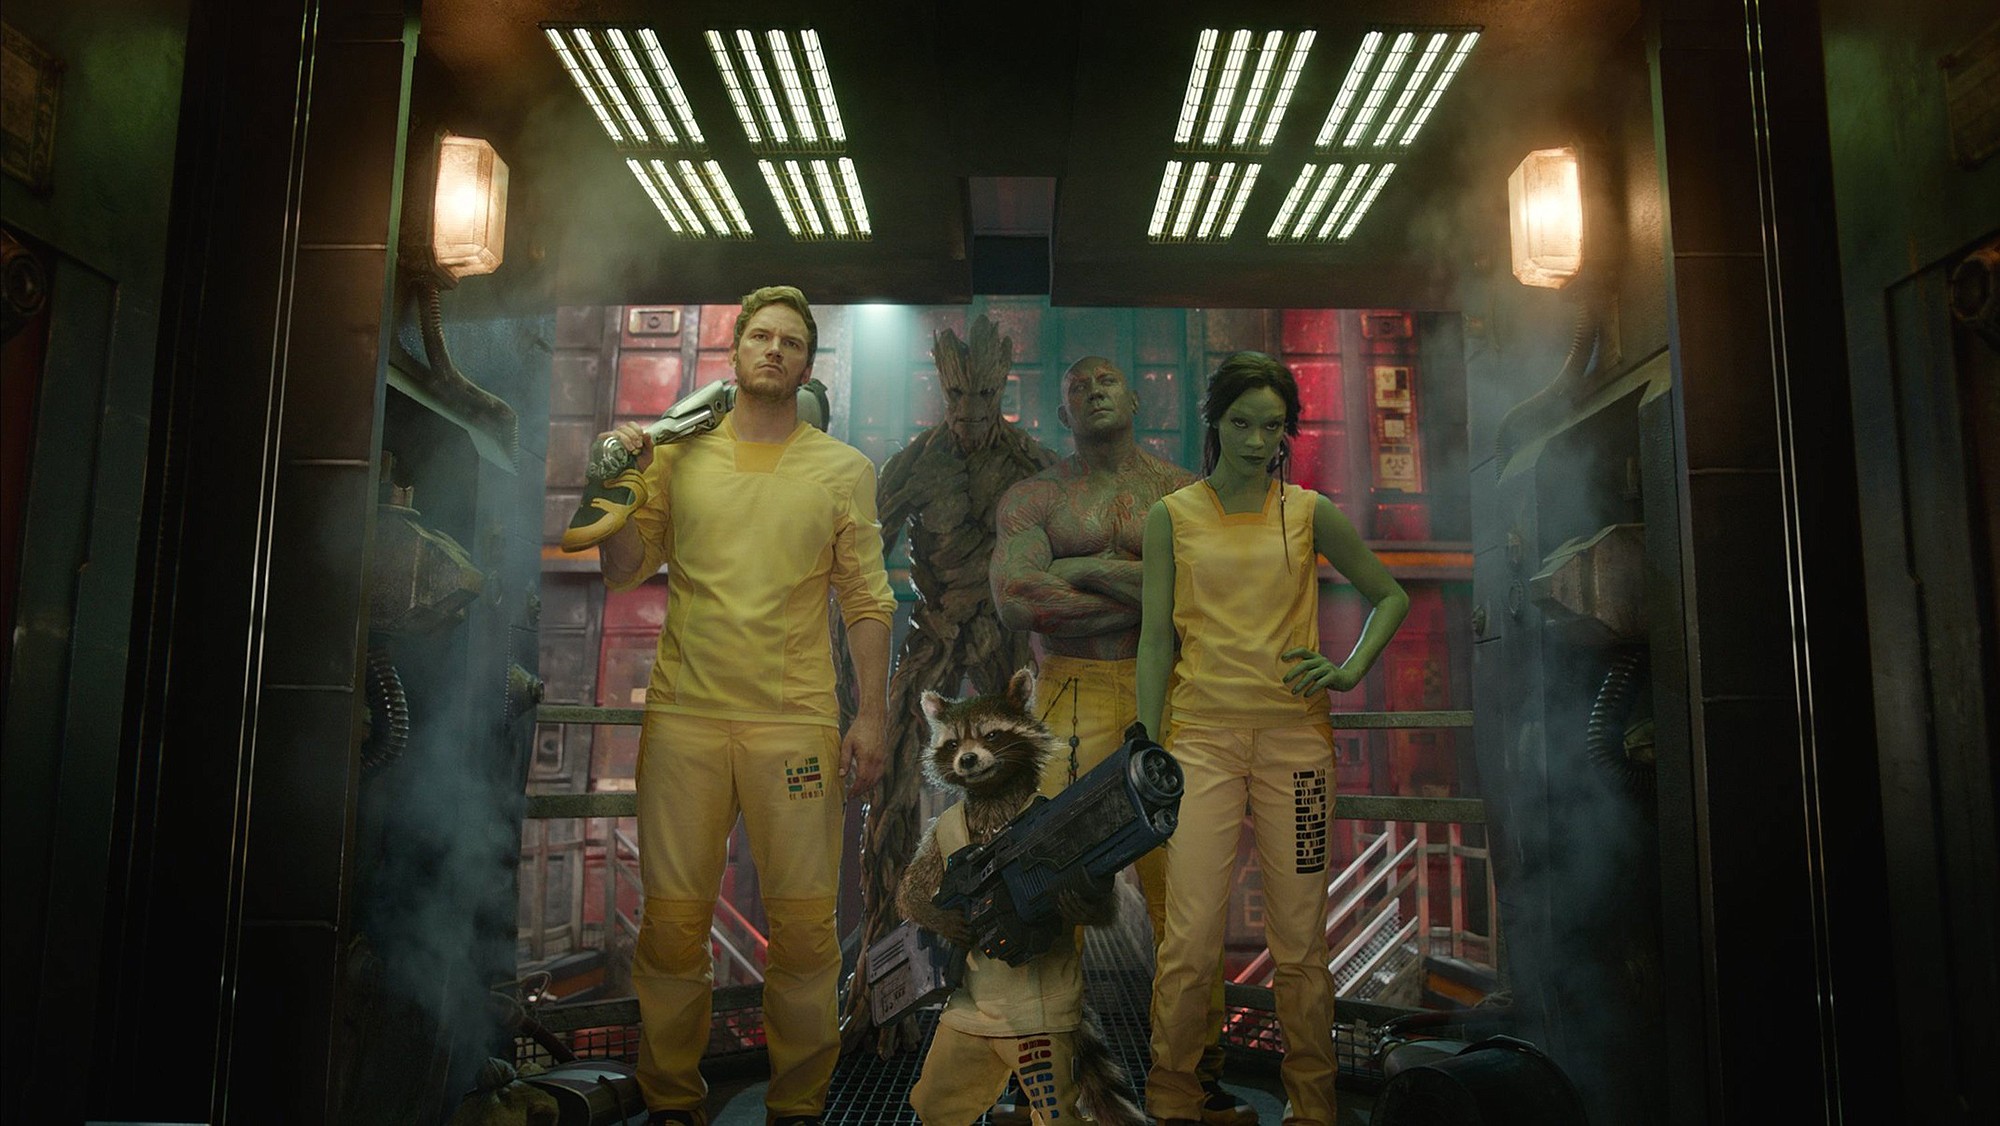 Marvel
Marvel's &quot;Guardians of the Galaxy&quot; are Chris Pratt, from left, Groot (voiced by Vin Diesel), Rocket Raccoon (voiced by Bradley Cooper), Dave Bautista and Zoe Saldana.